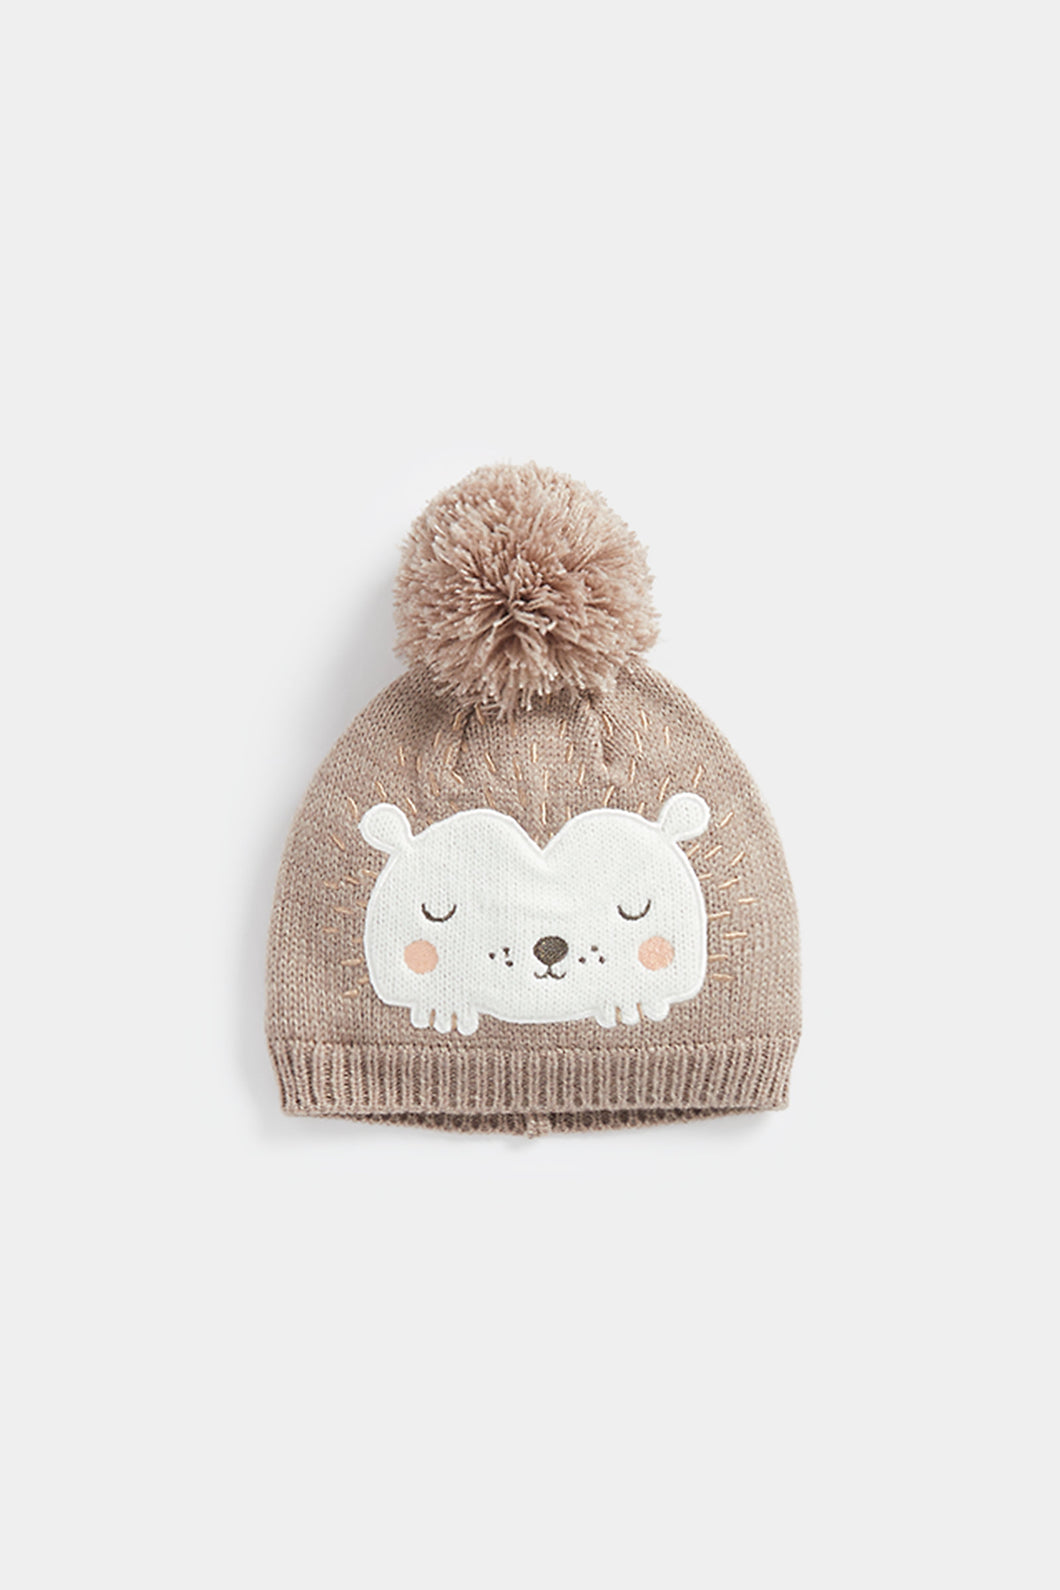 Mothercare Hedgehog Knitted Baby Hat